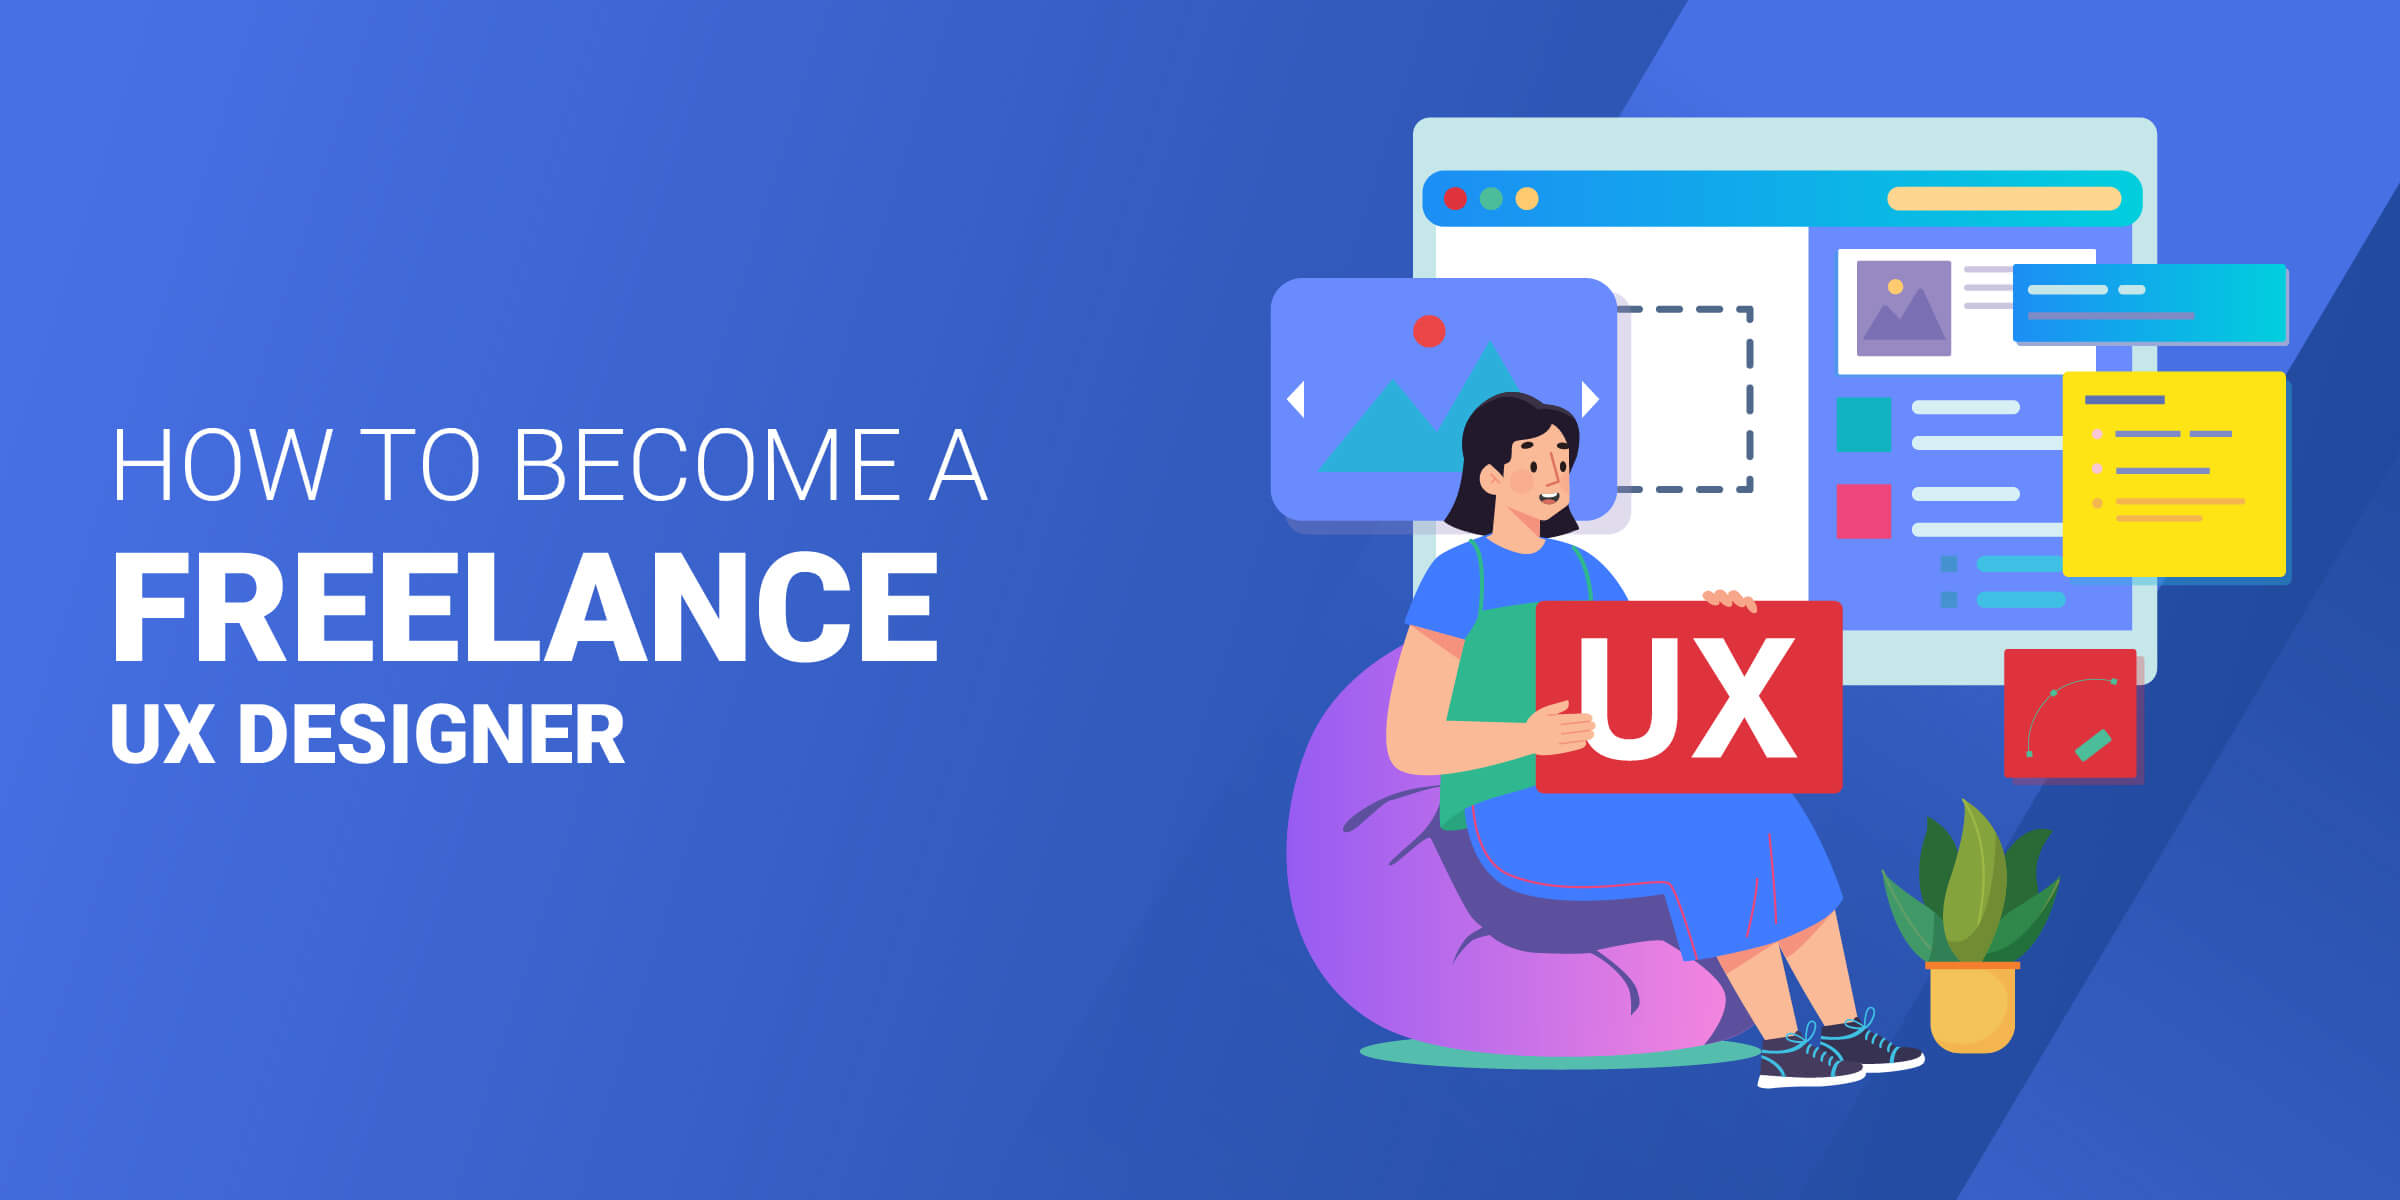 How to Become Freelance UX Designer